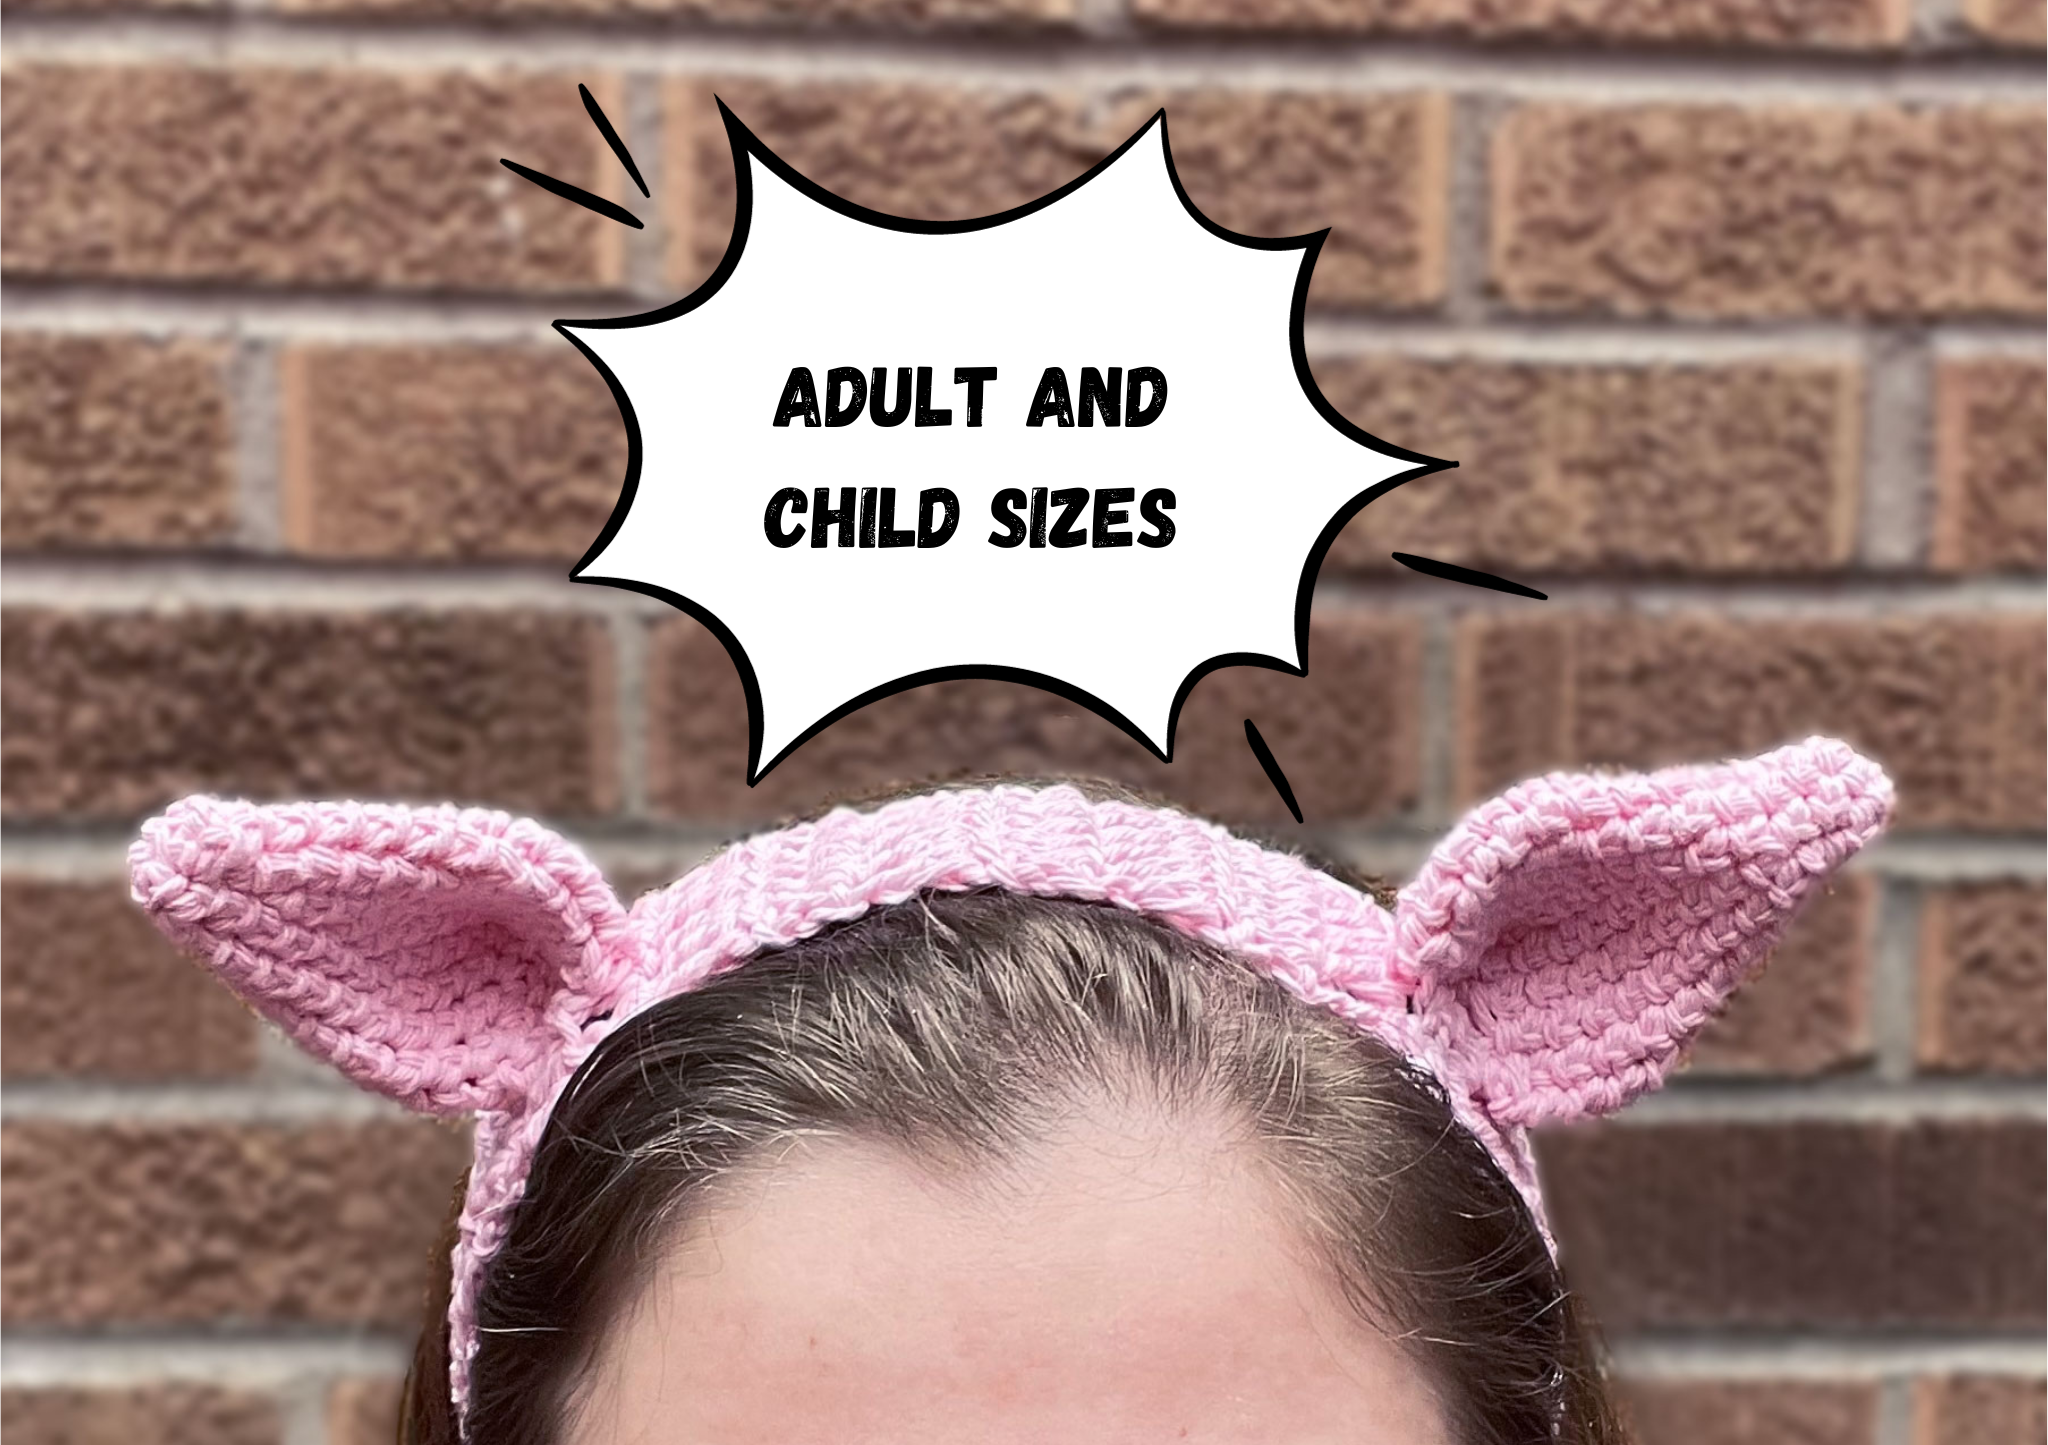 Pig Headband with text adult and child sizes on it